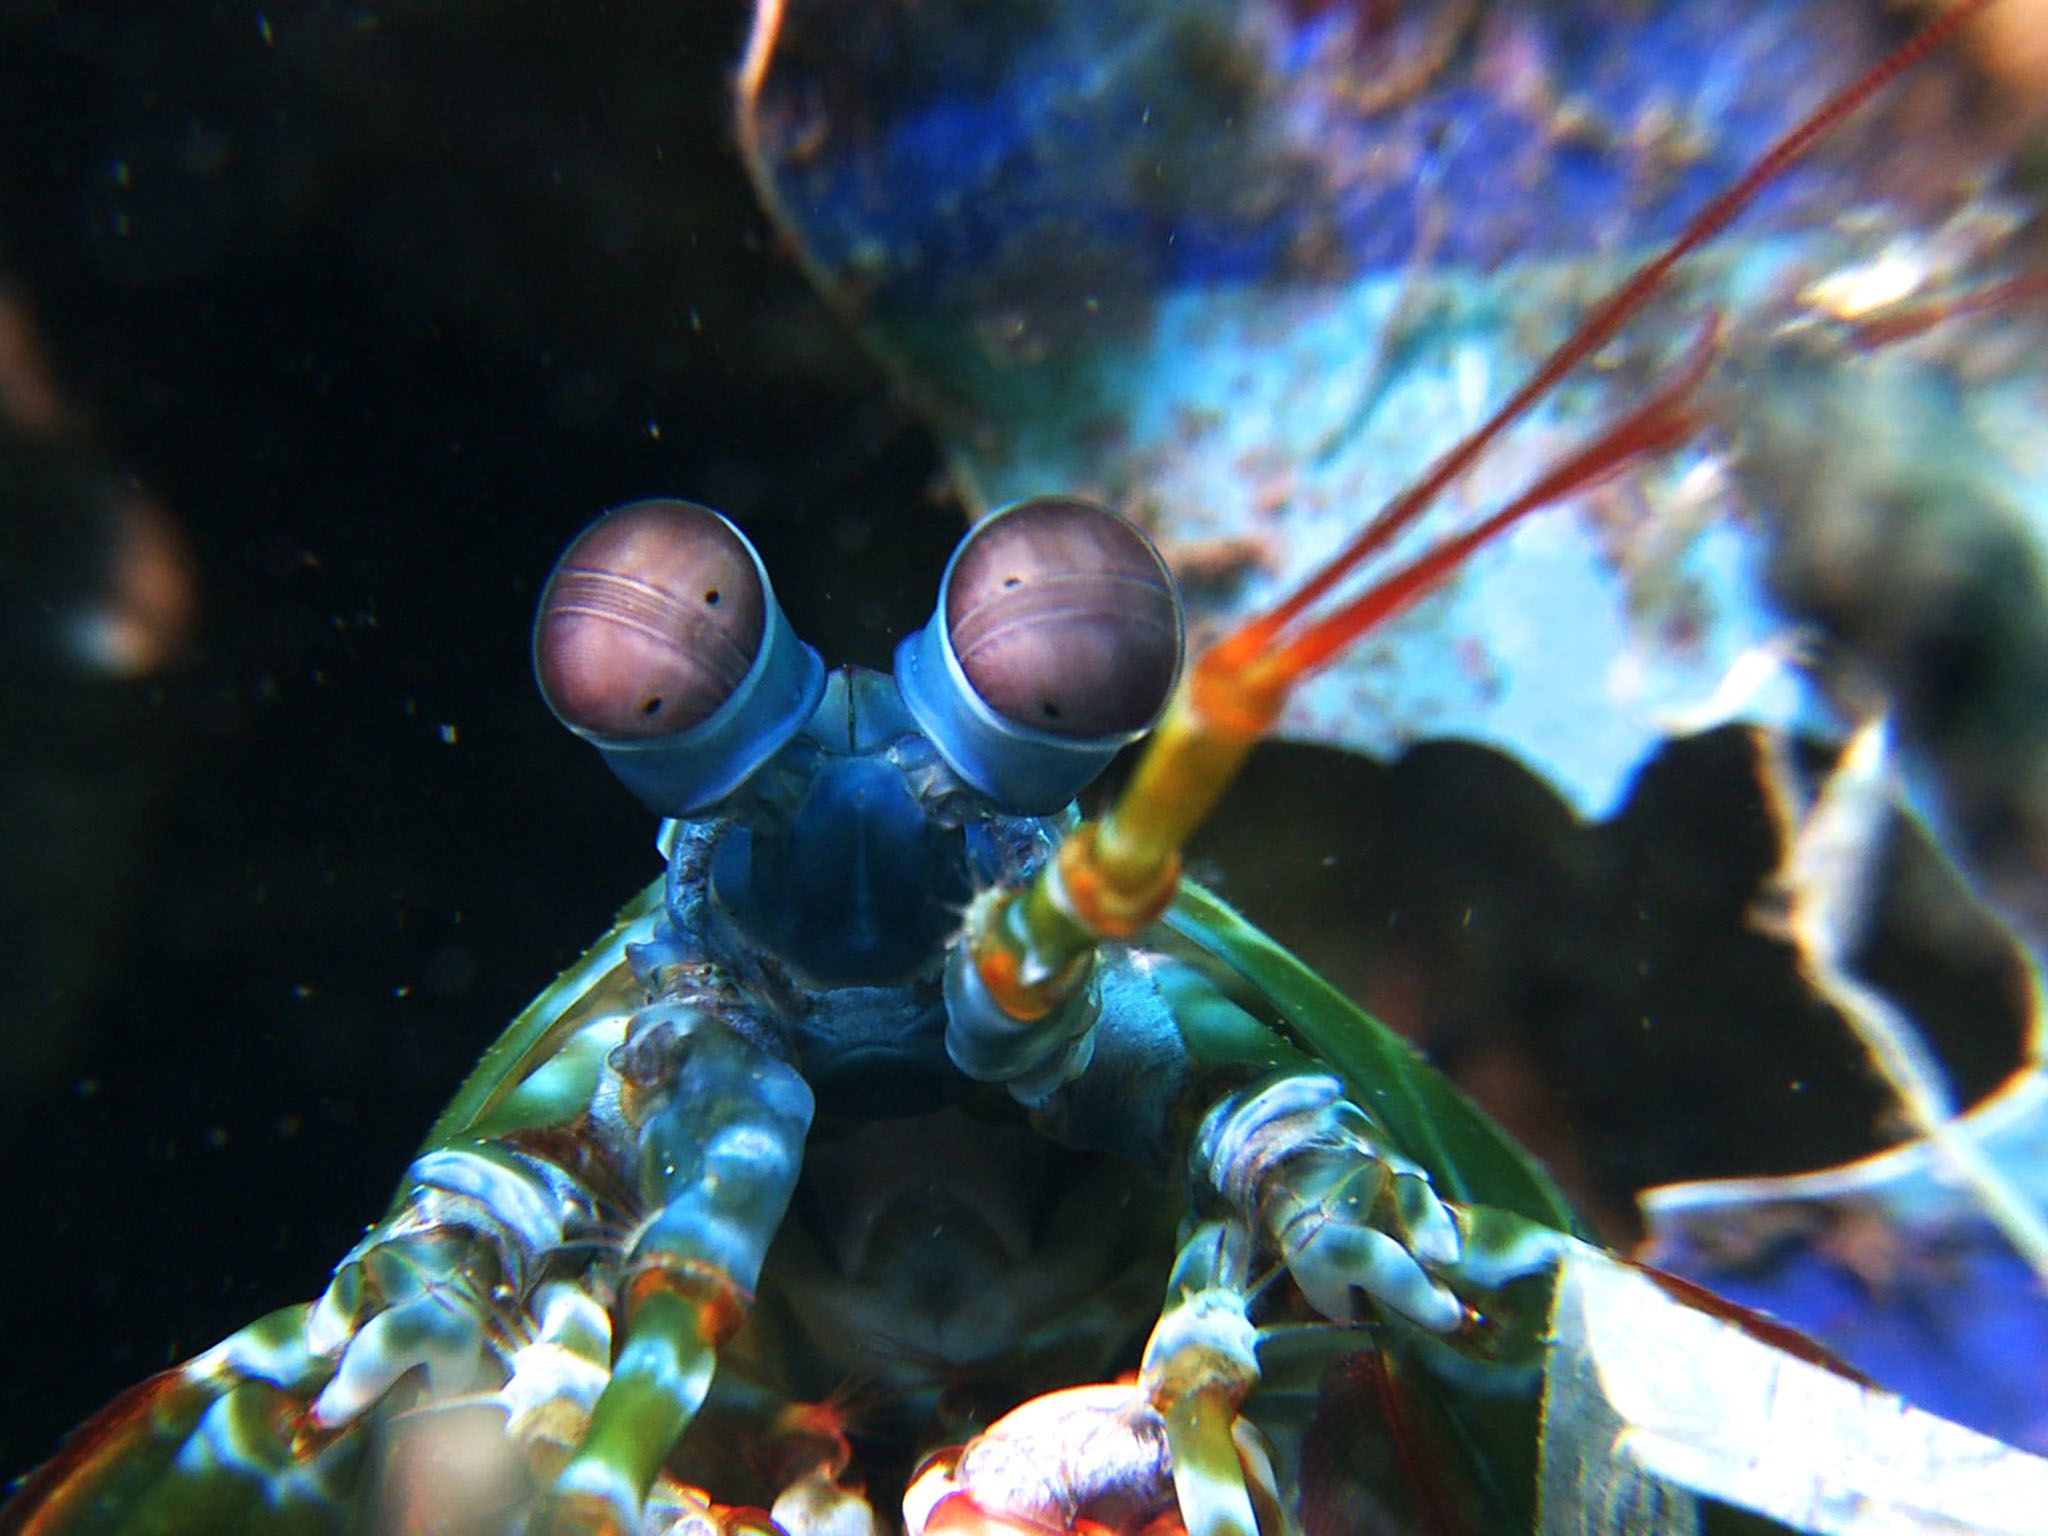 Indo-Pacific Ocean: The peacock mantis shrimp (odontodactylus scyllarus) is one of the larger,... [Photo of the day - July 2016]